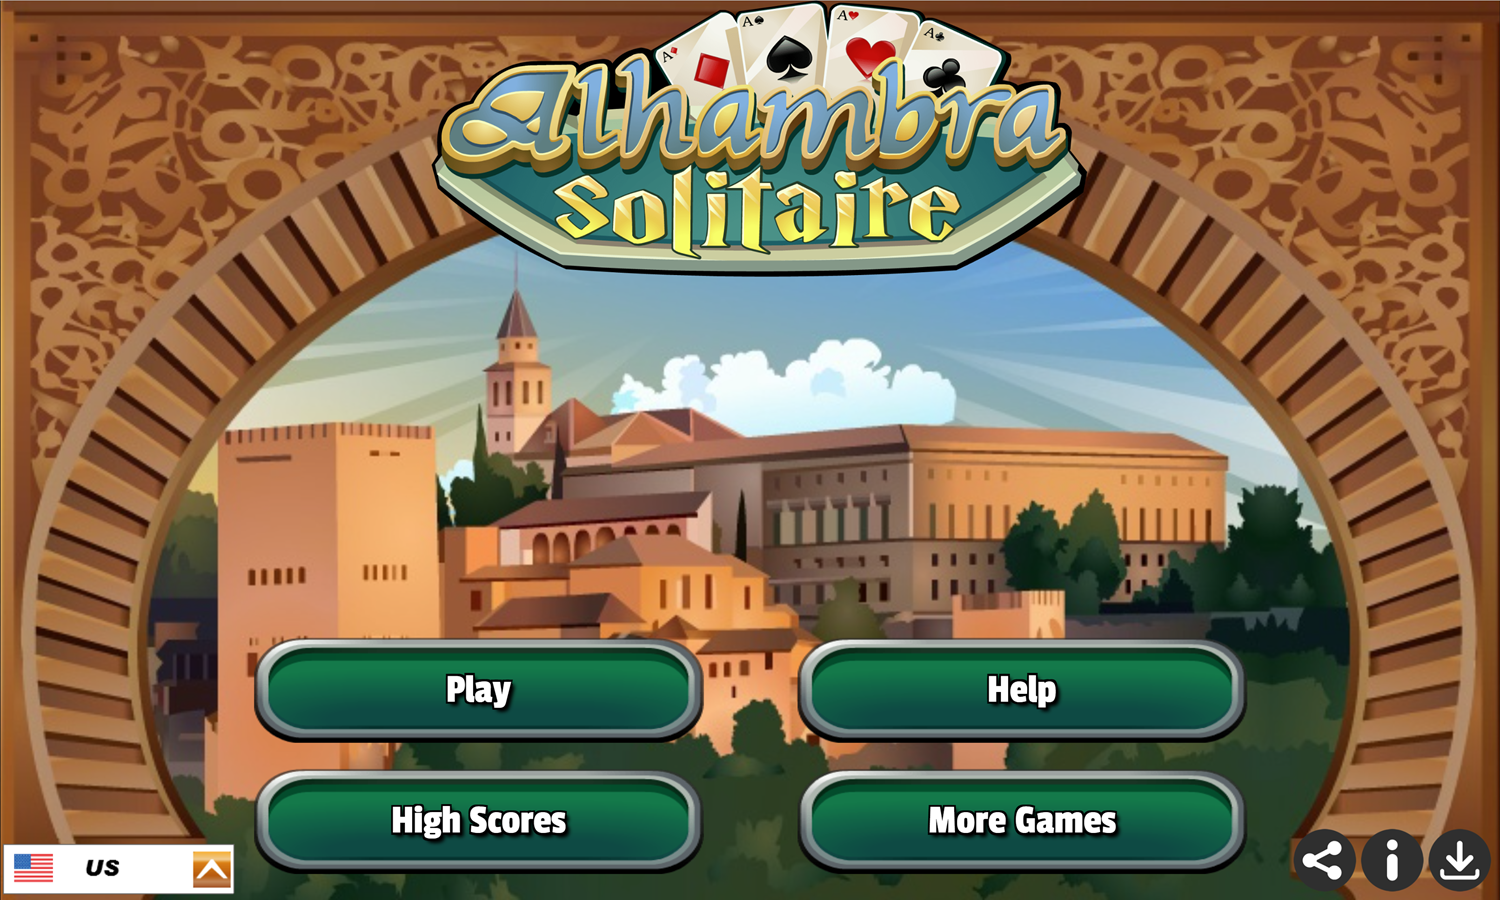 Alhambra Solitaire Game Welcome Screen Screenshot.